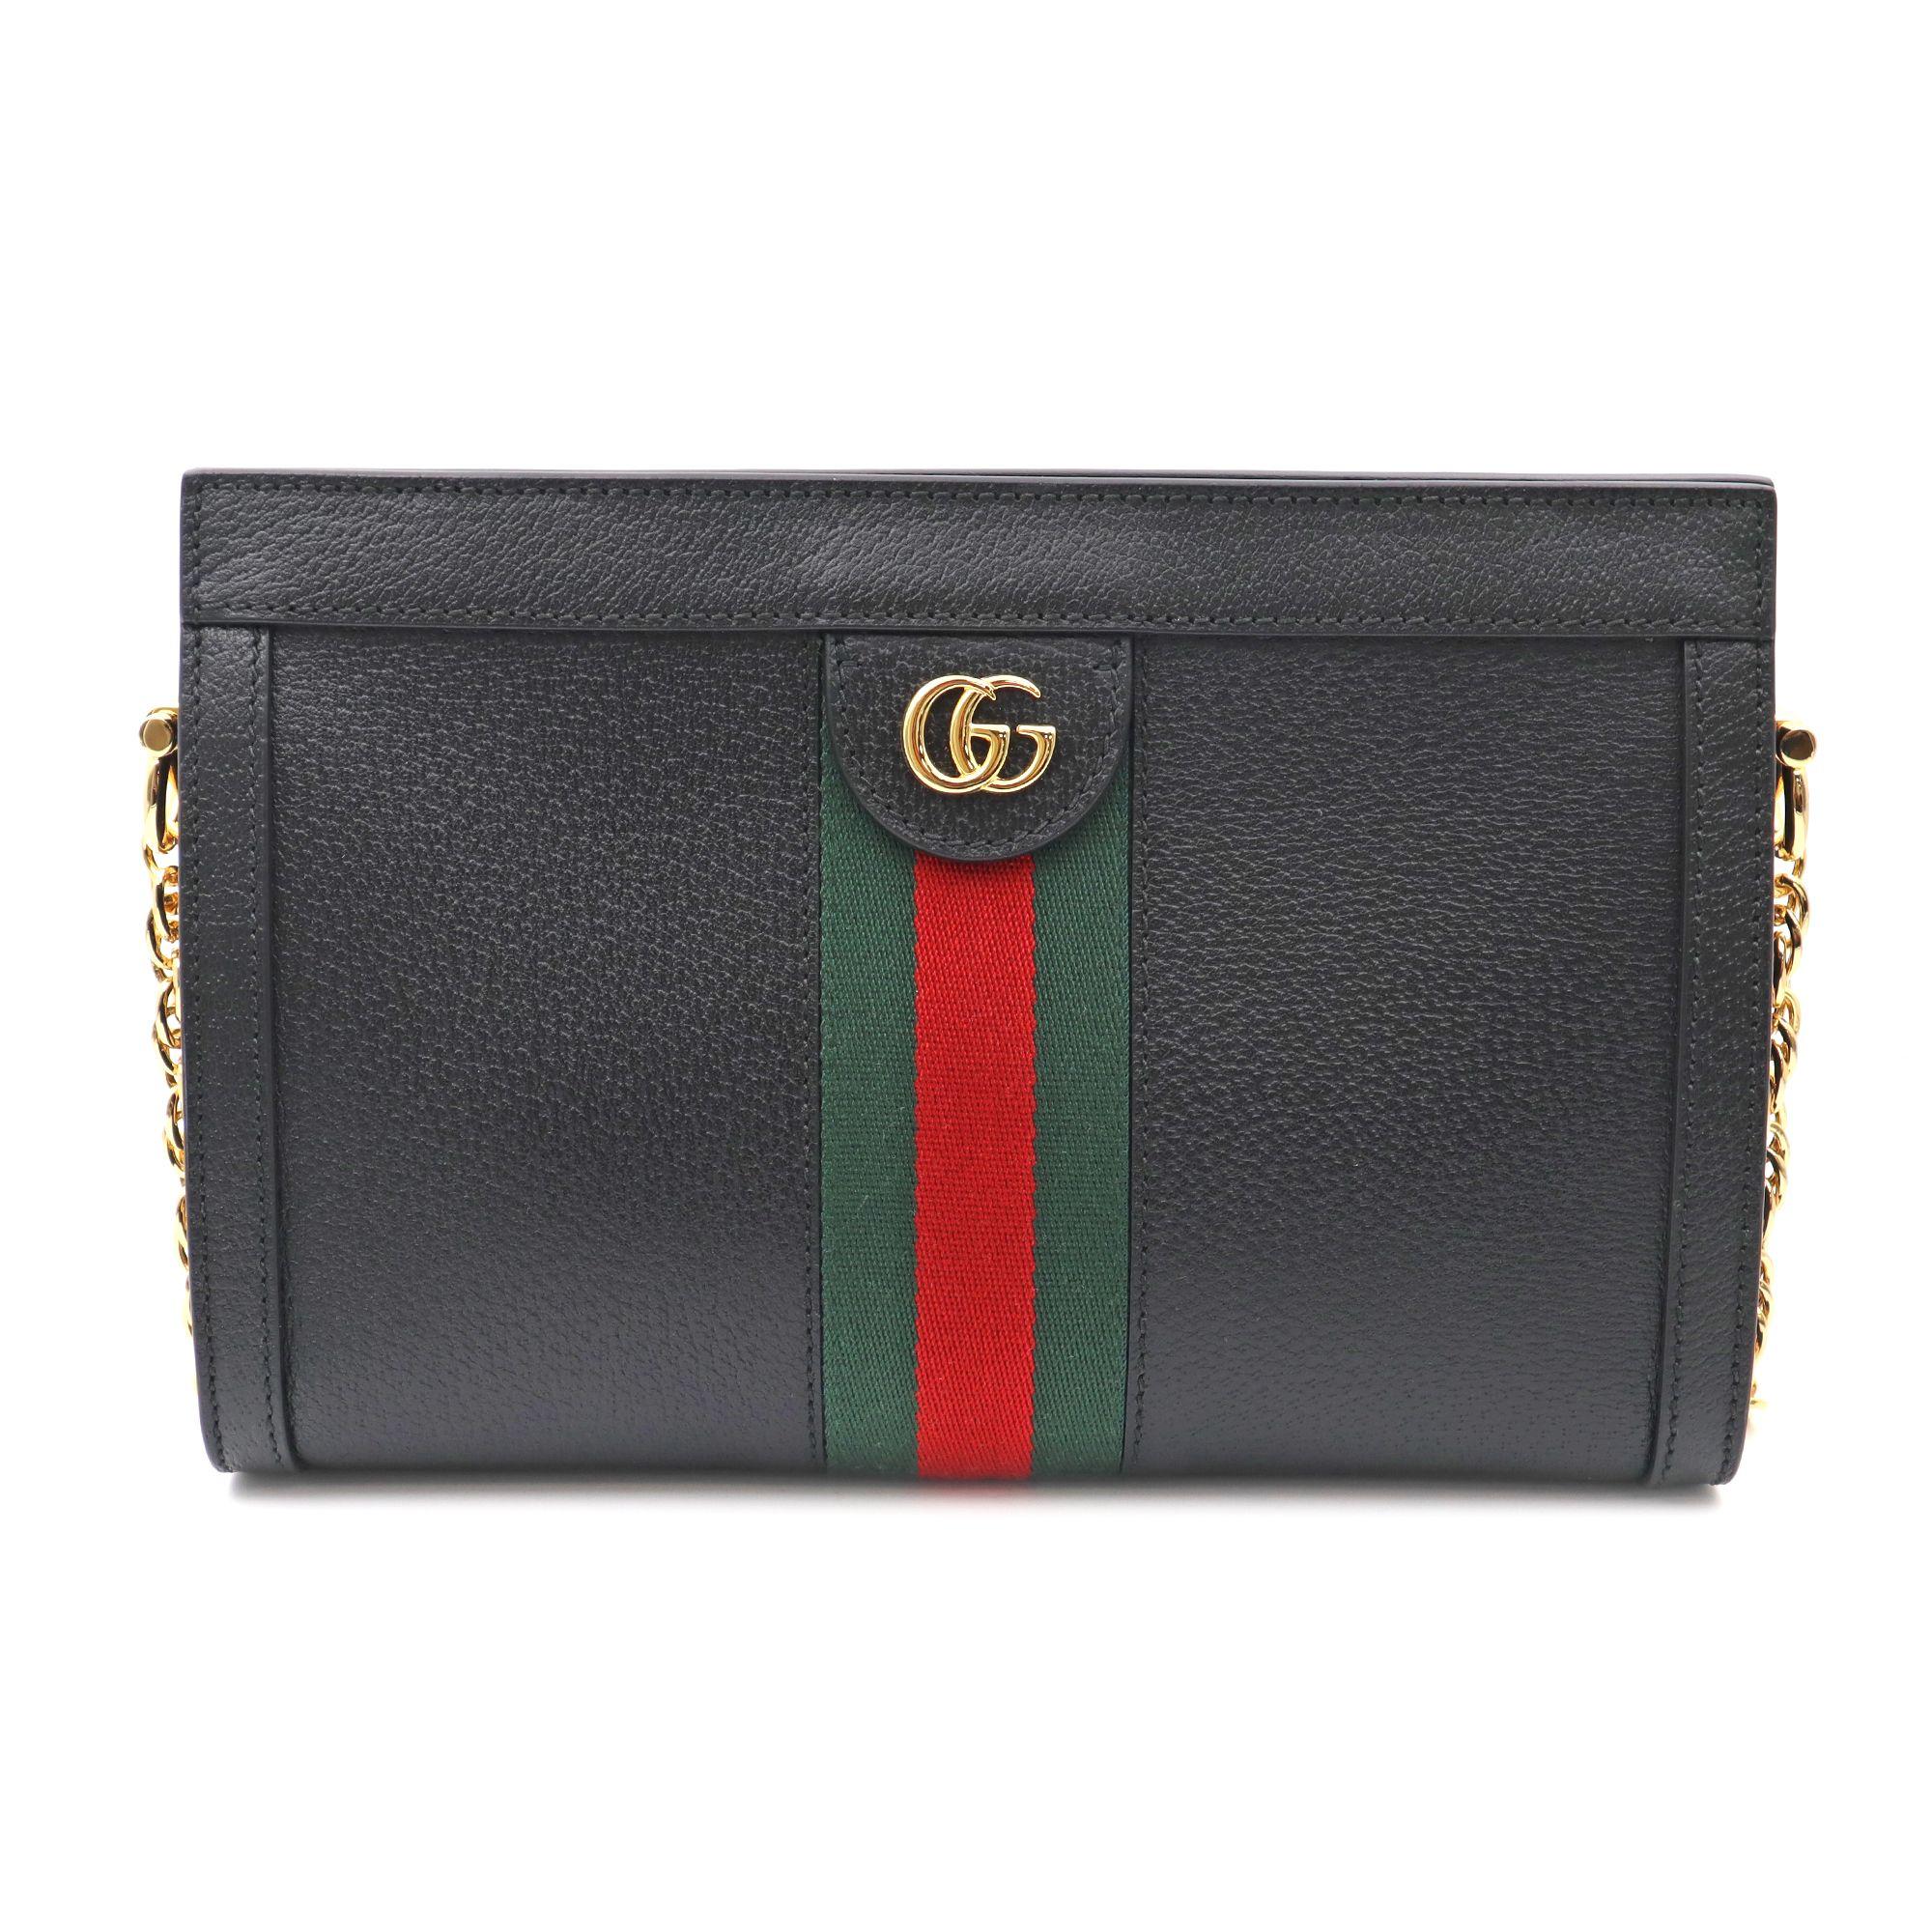 The Guccismall chain Ophidia shoulder bag was introduced in a new iteration for Pre-Fall 2019, crafted from black leather with inlaid green and red Web stripe. The coveted style is defined by small Double G details at the front tab—a contemporary